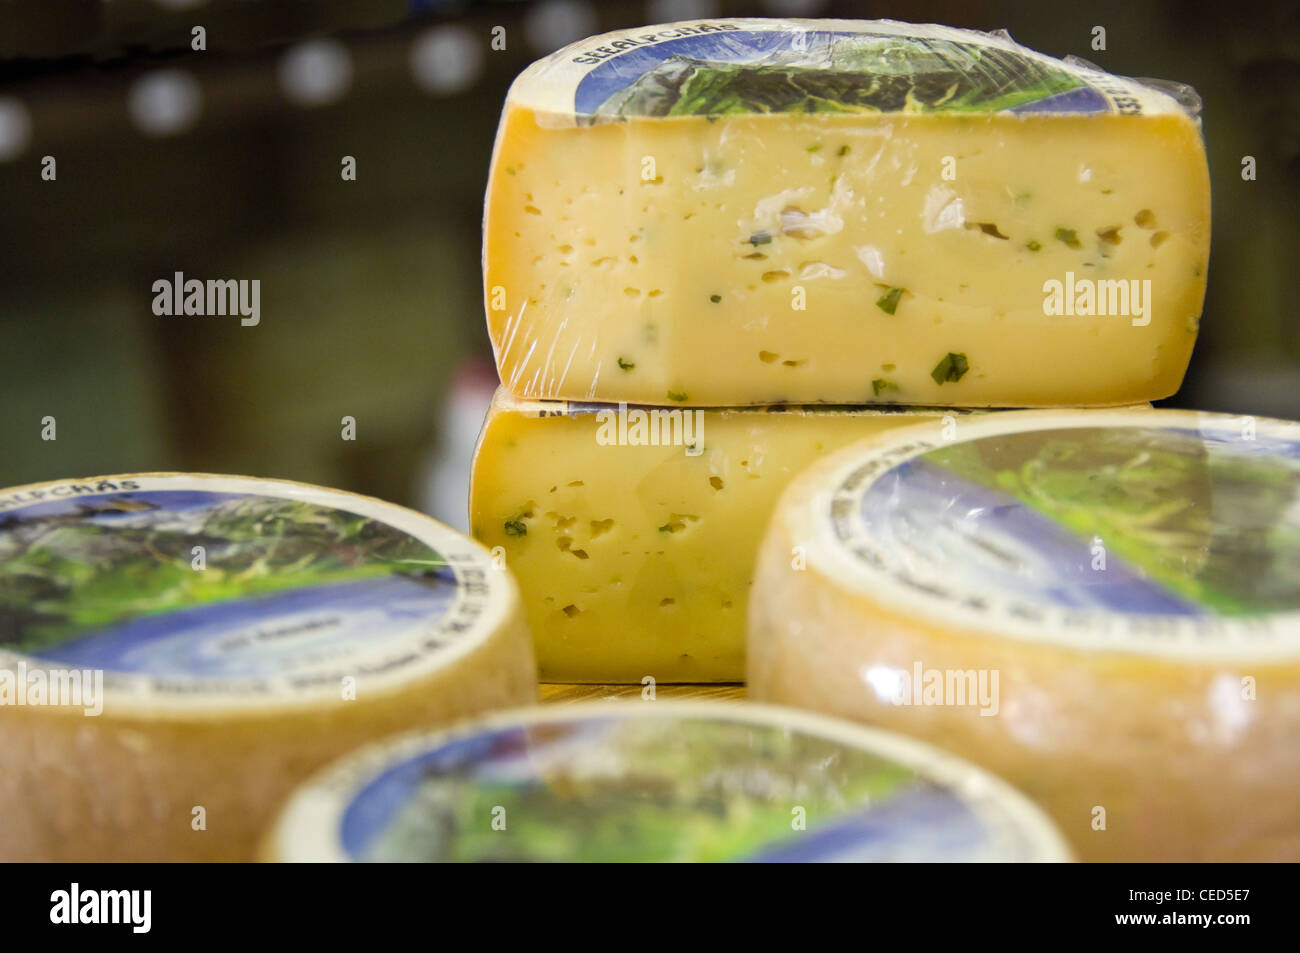 Horizontal close up of traditional Appenzeller cheese on display at a delicatessen Stock Photo